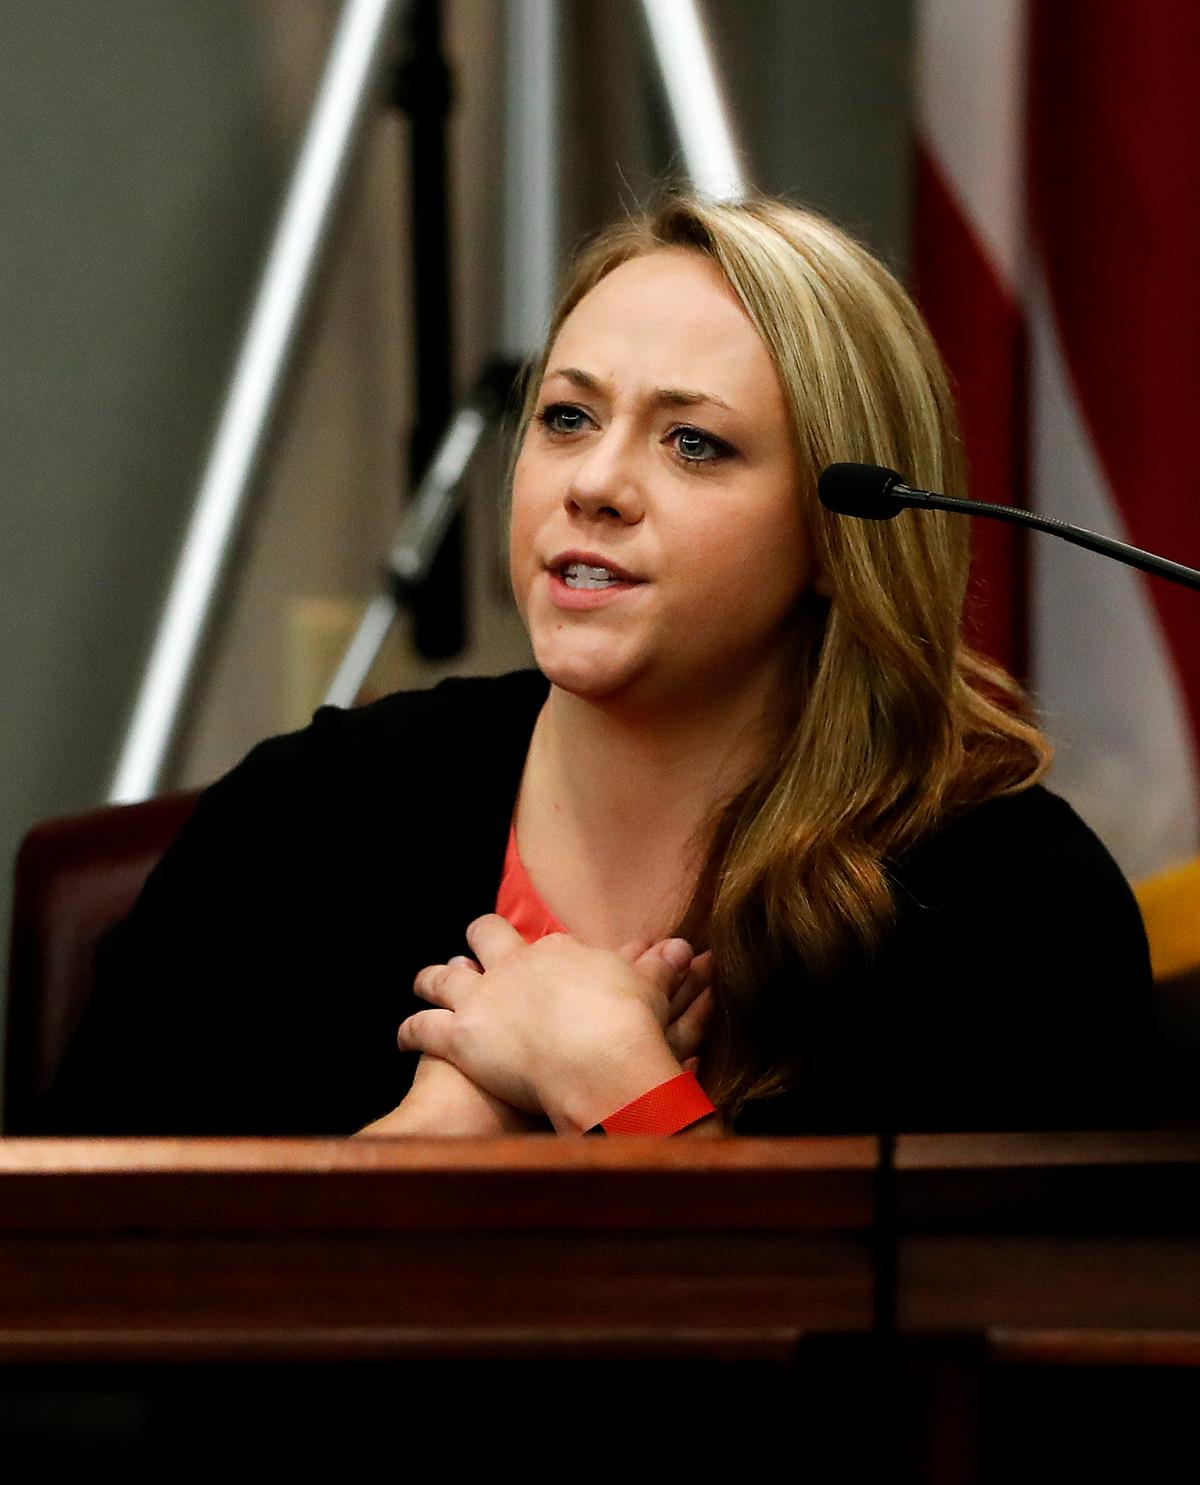 Leanna Taylor testifies during a murder trial for her ex-husband Justin Ross Harris in Brunswick, Ga., on Oct. 31, 2016. (AP Photo/John Bazemore, Pool)